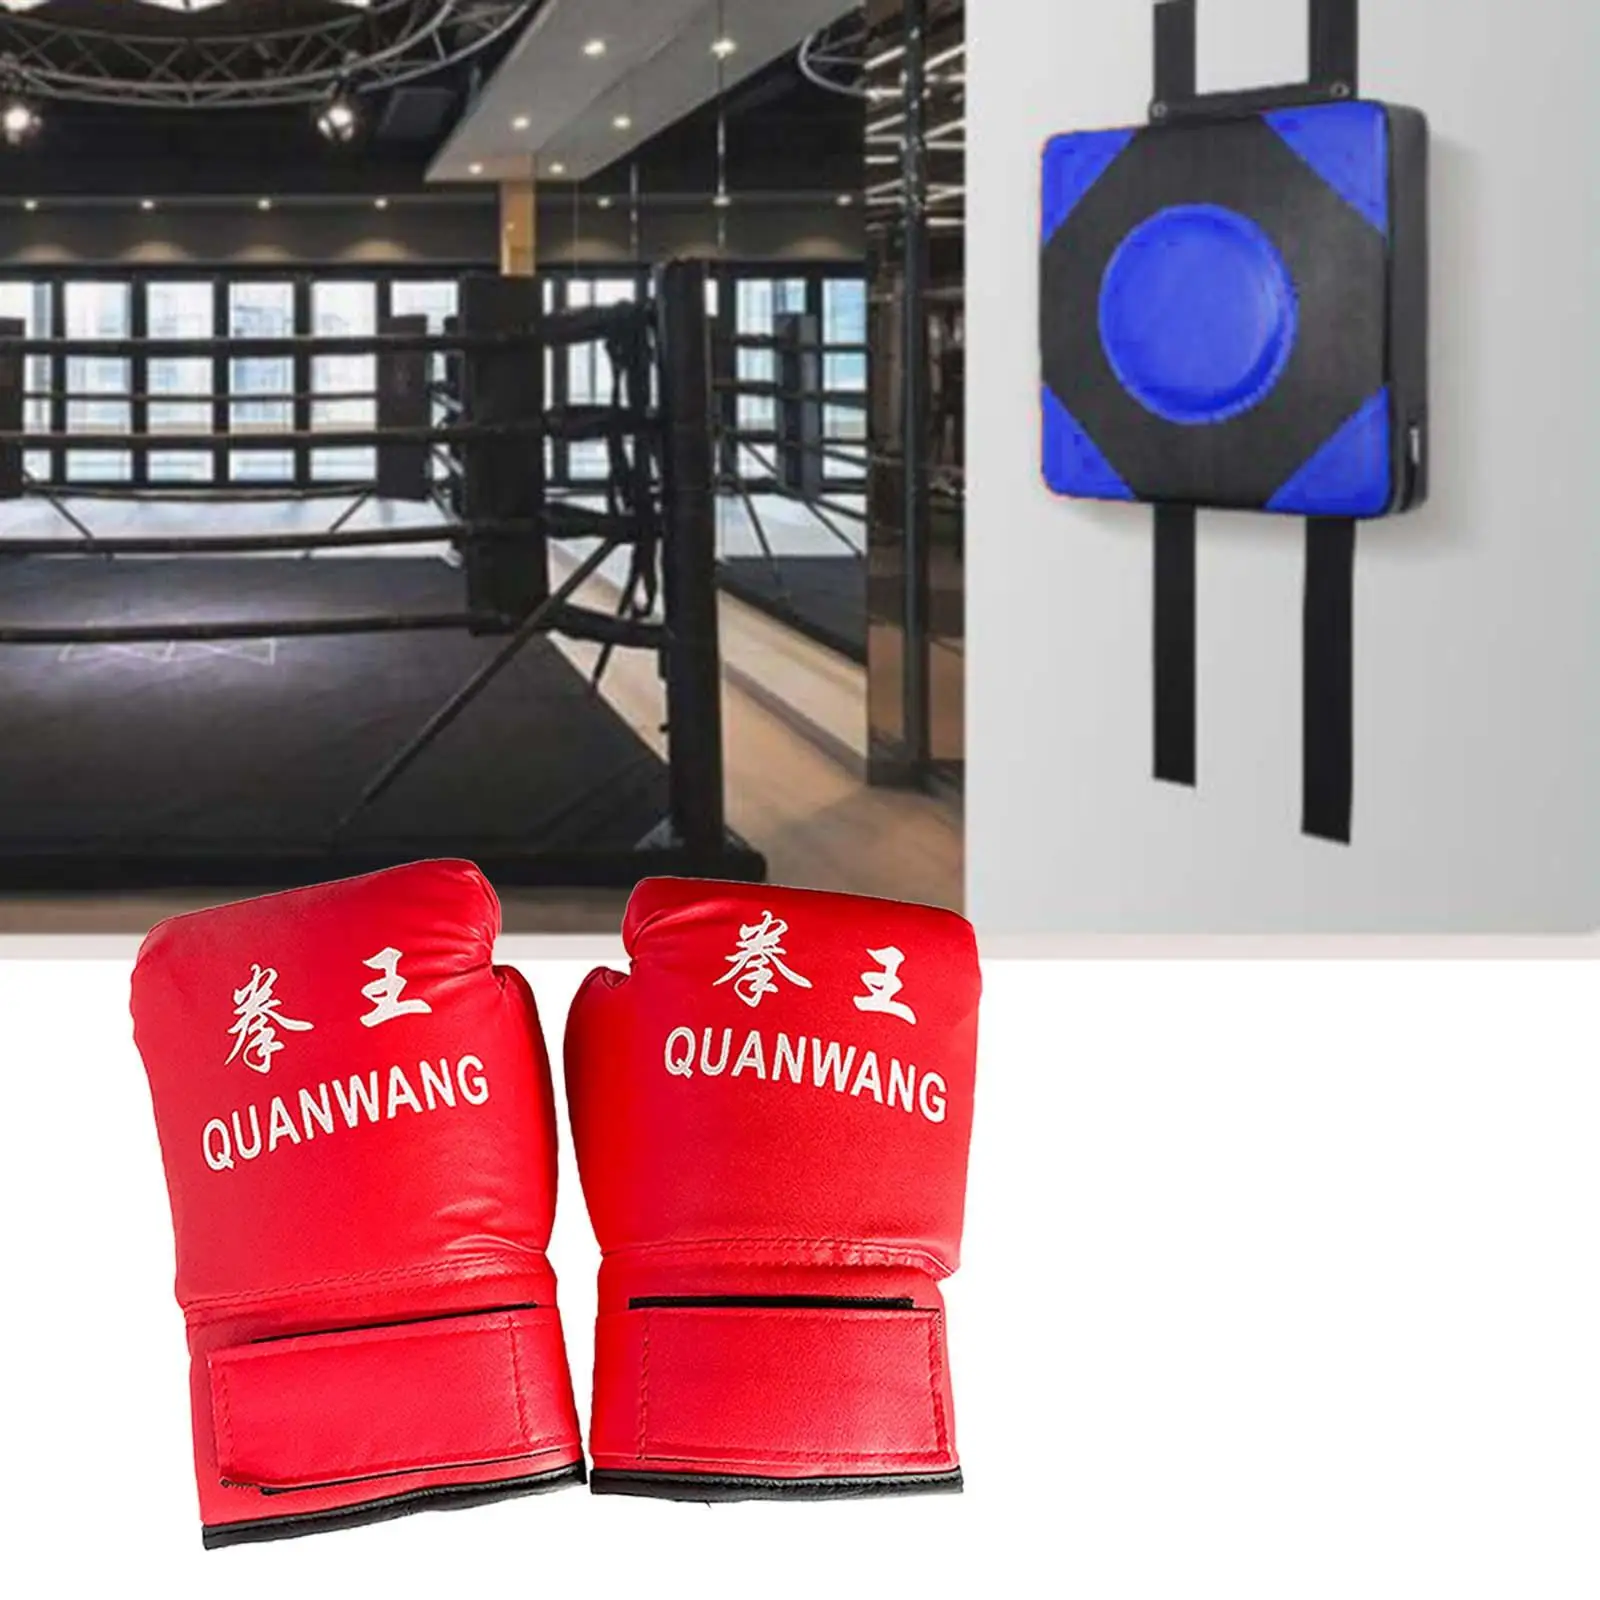 Boxing Wall Target Reaction Training Target Punching Bag for Exercise Relaxing Fitness Martial Arts Boxing Training Equipment